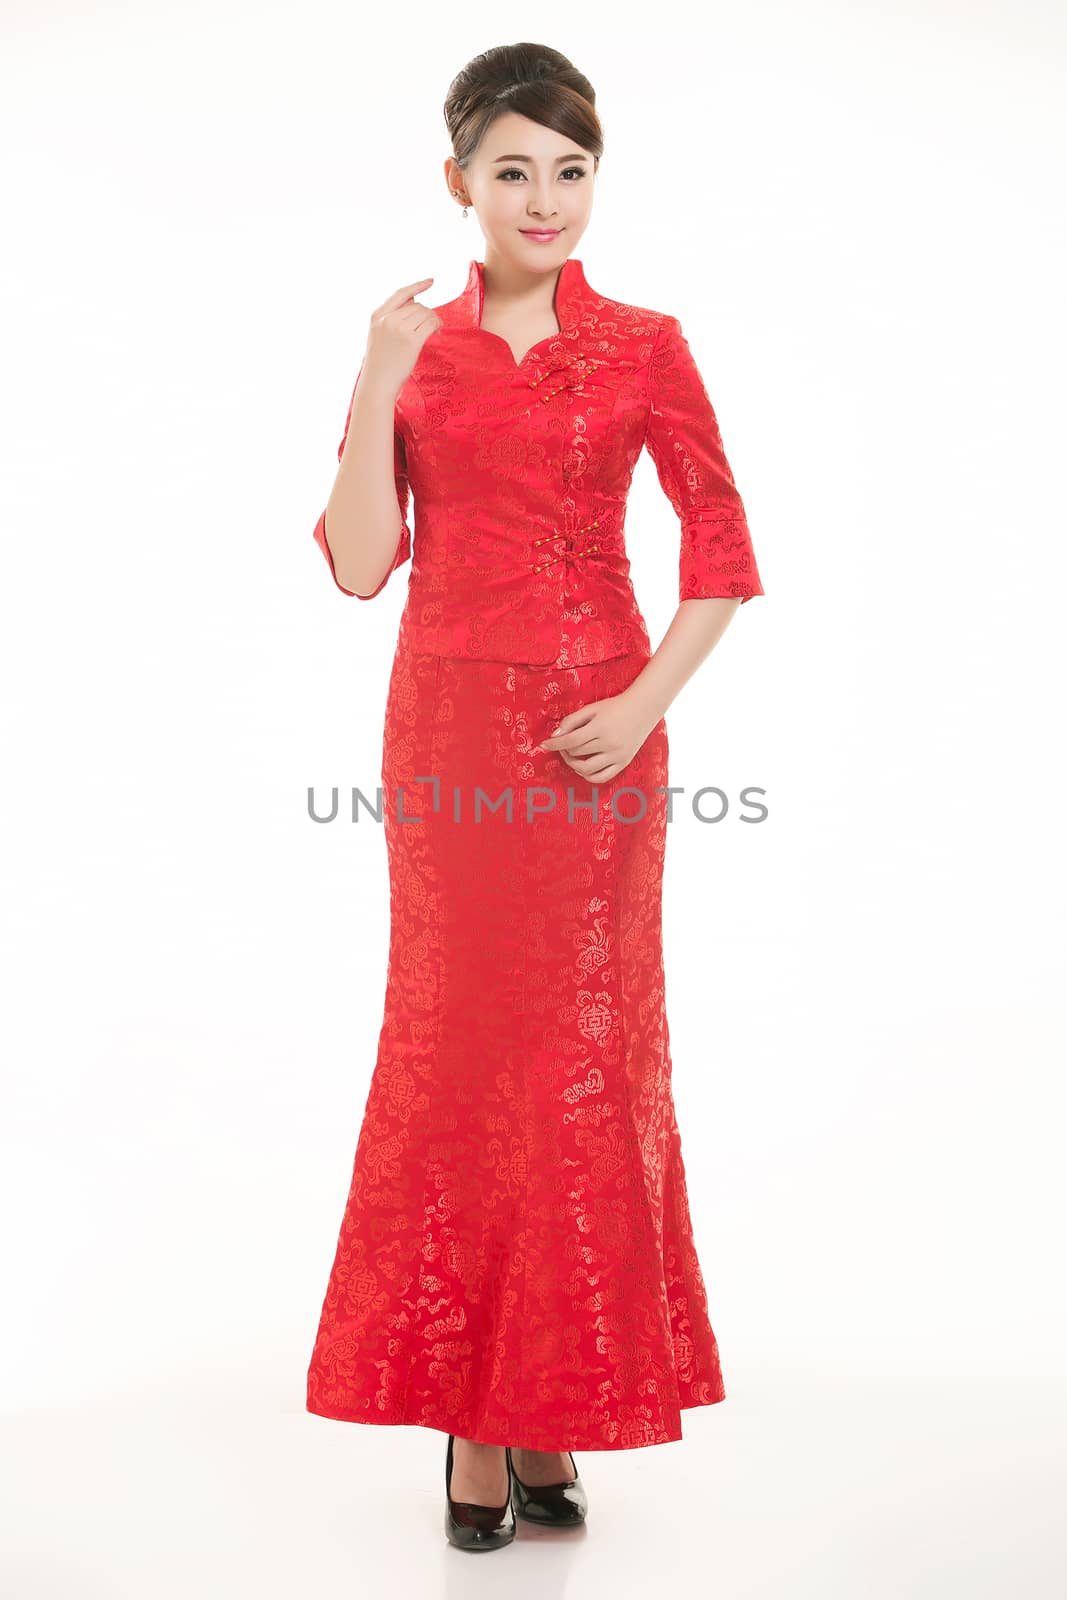 Wearing Chinese clothing waiter in front of a white background by quweichang